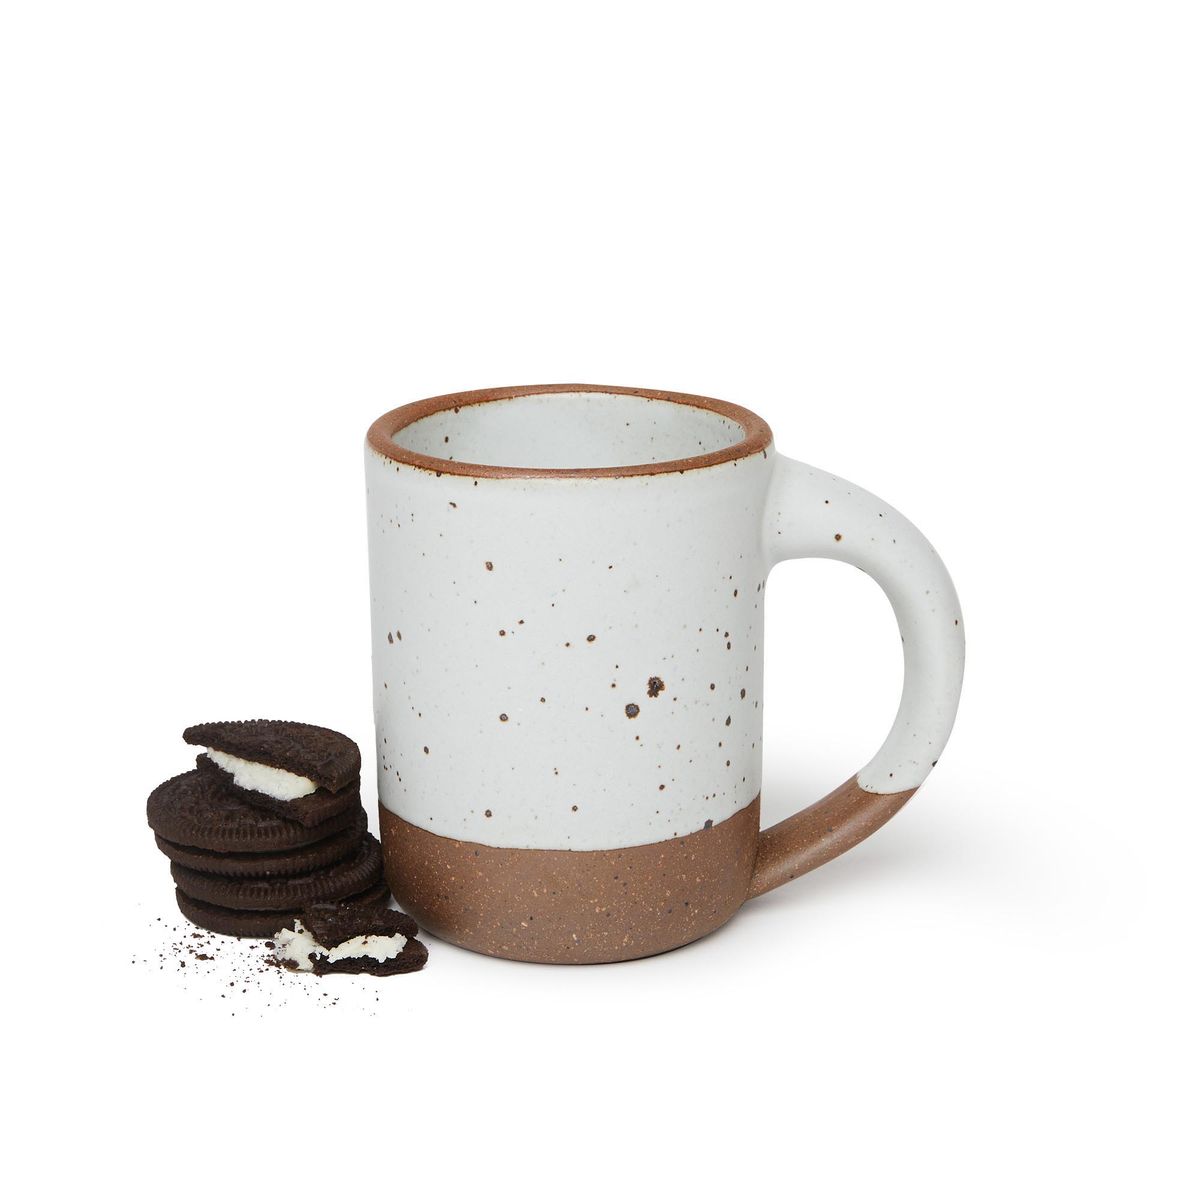 The Mug in Eggshell with cookies